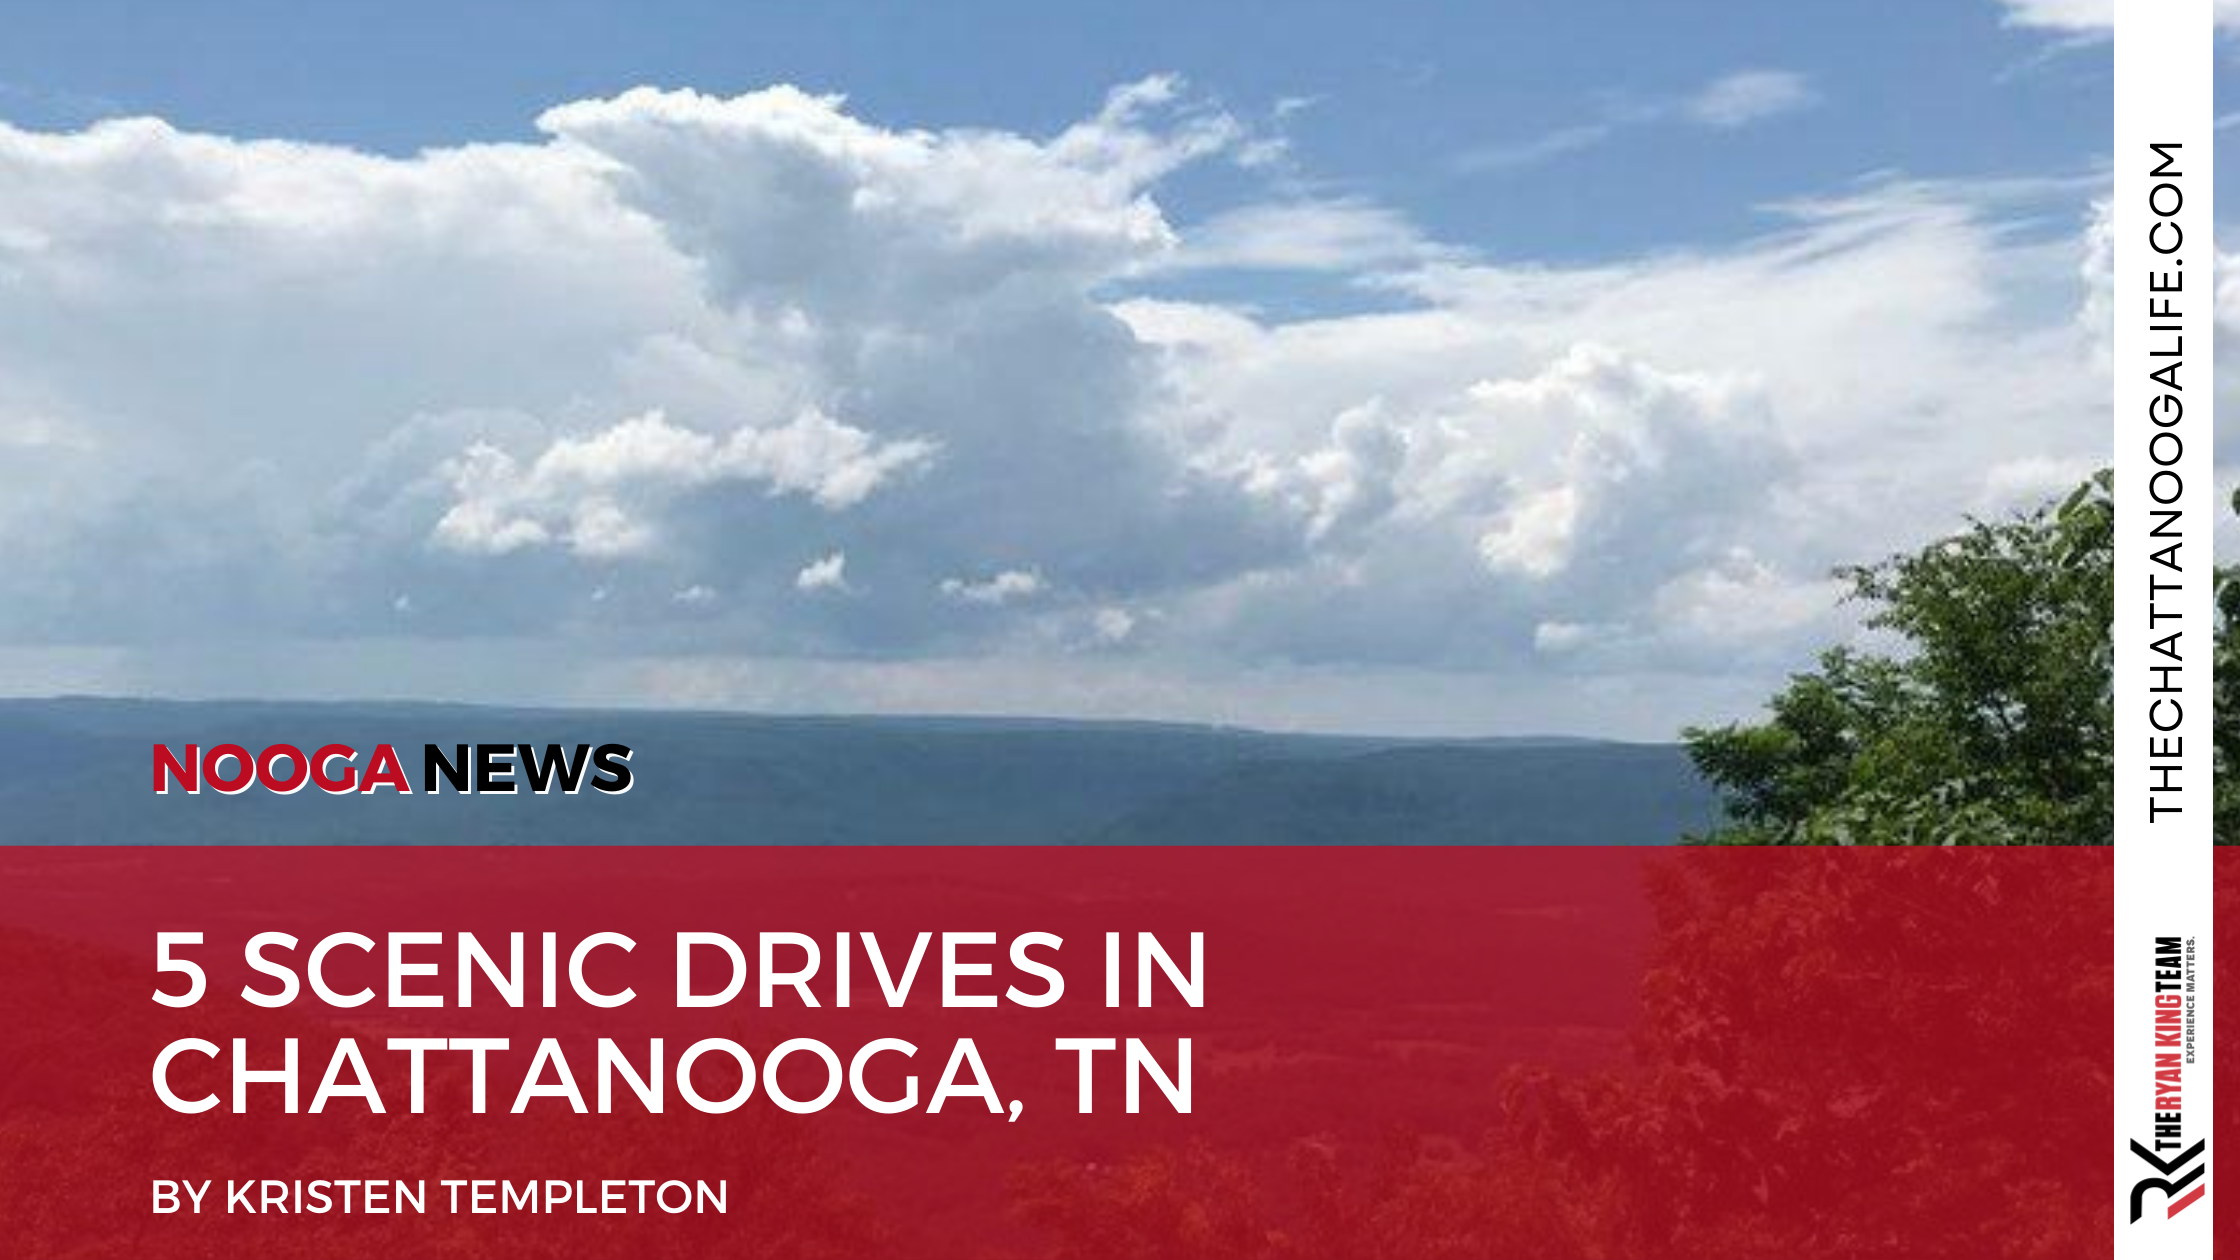 5 scenic drives in Chattanooga, TN